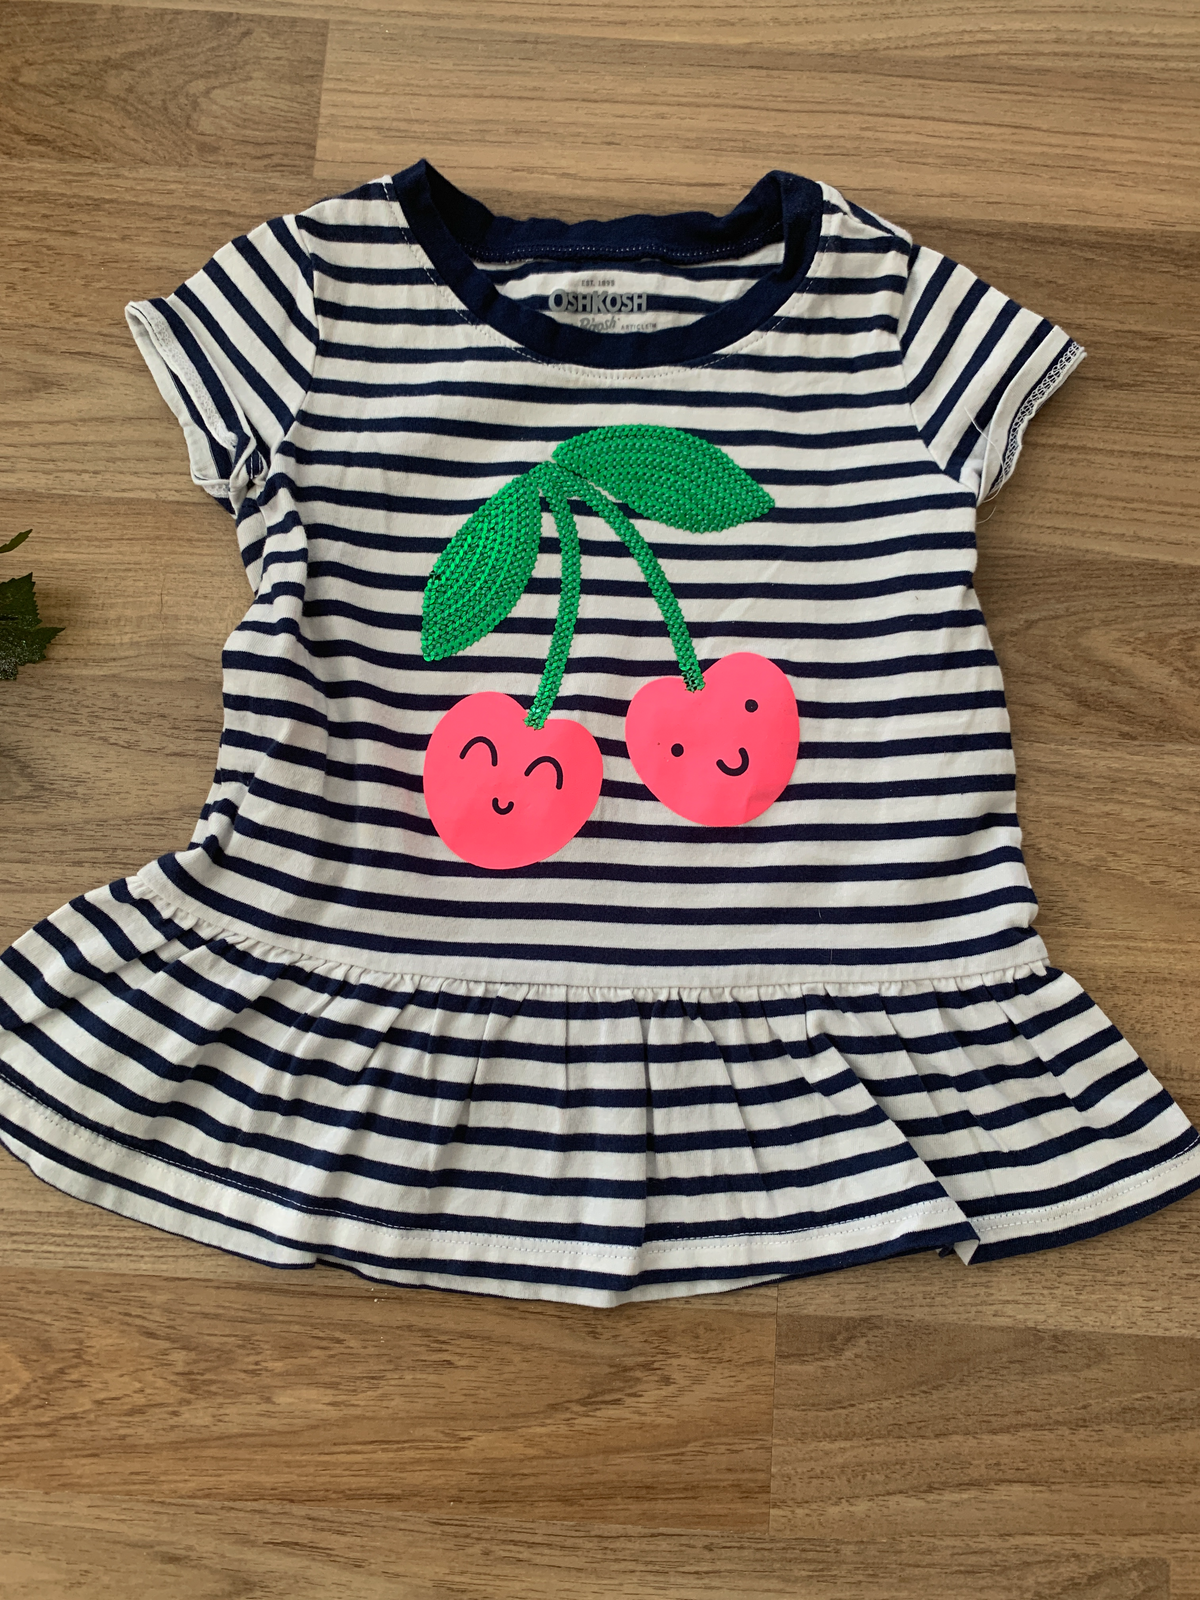 Short Sleeve striped top (Girls Size 3)